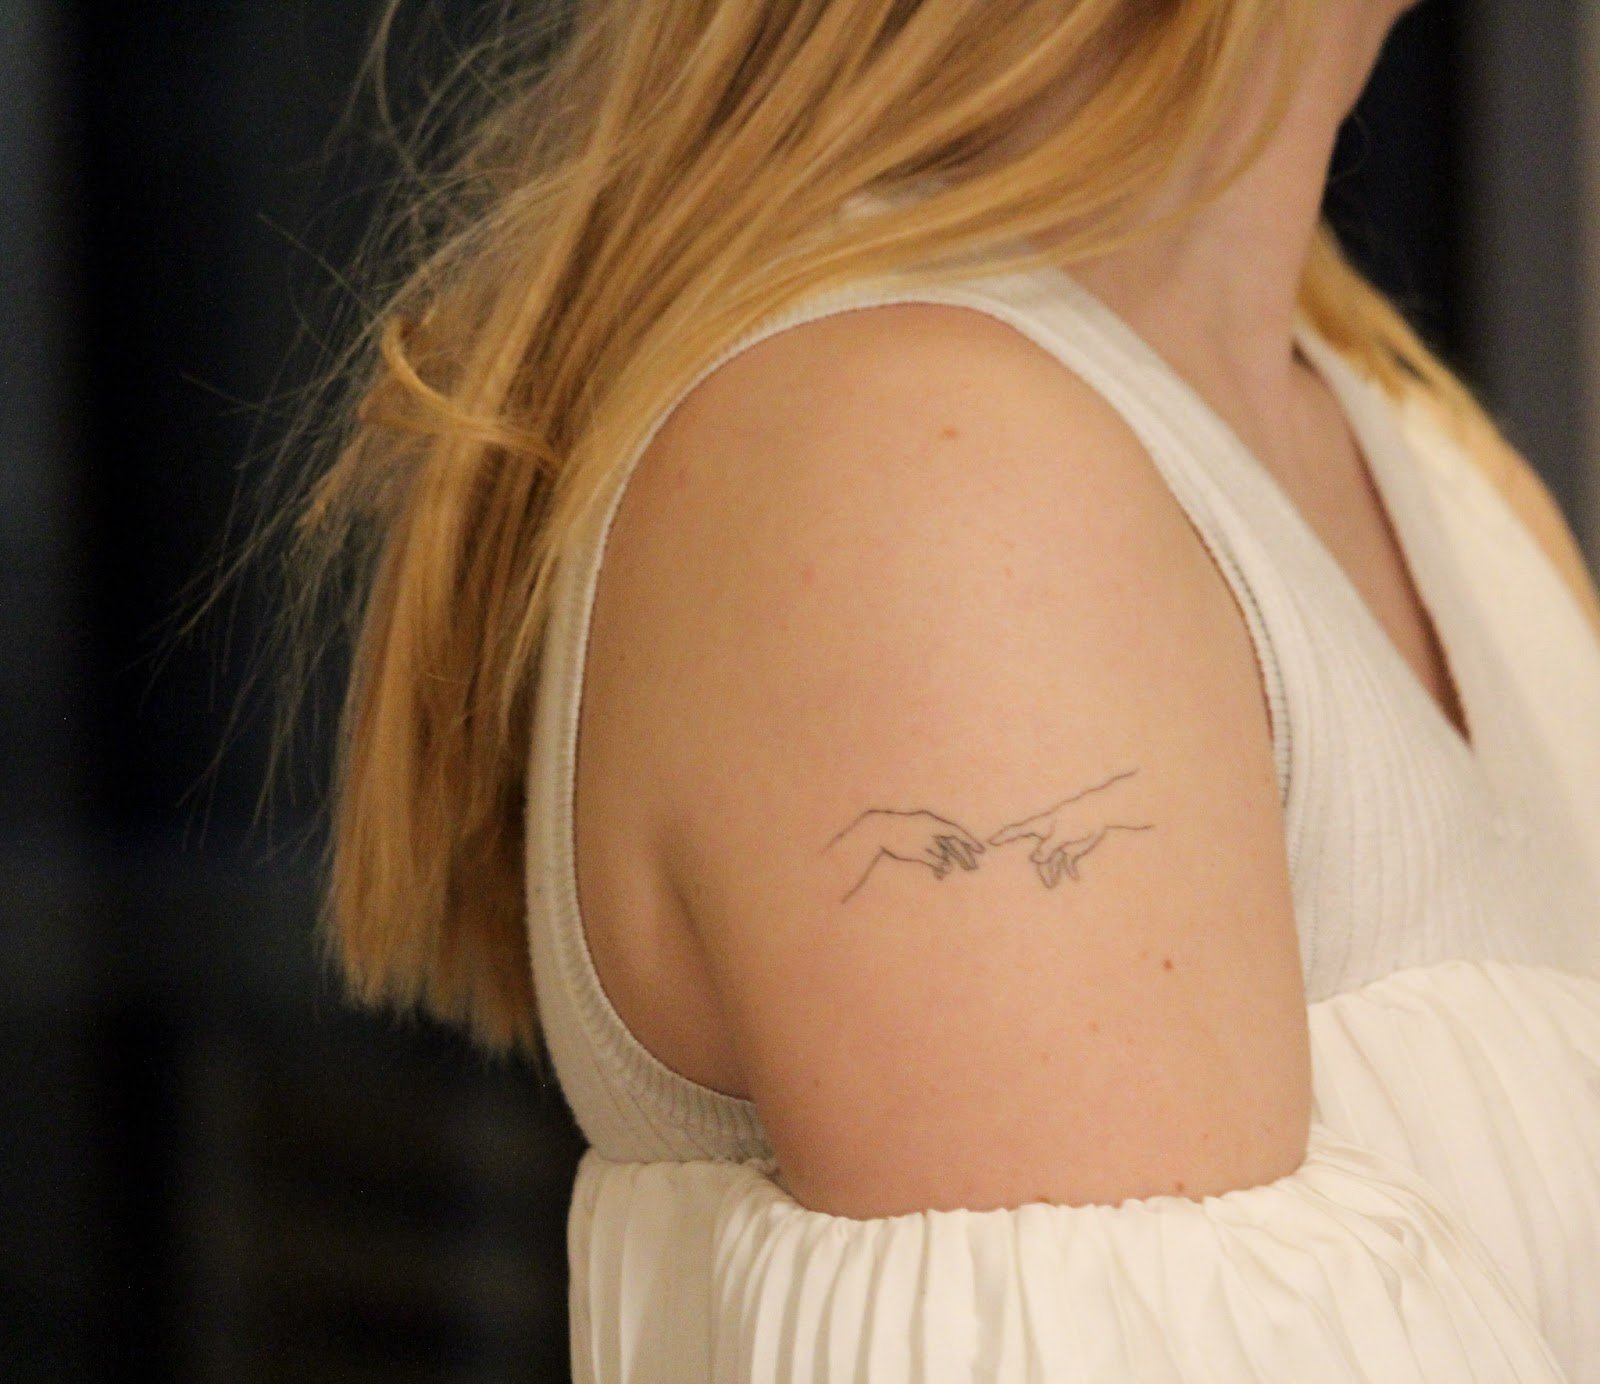 28 Animal Tattoos You've Got to See to Believe ...